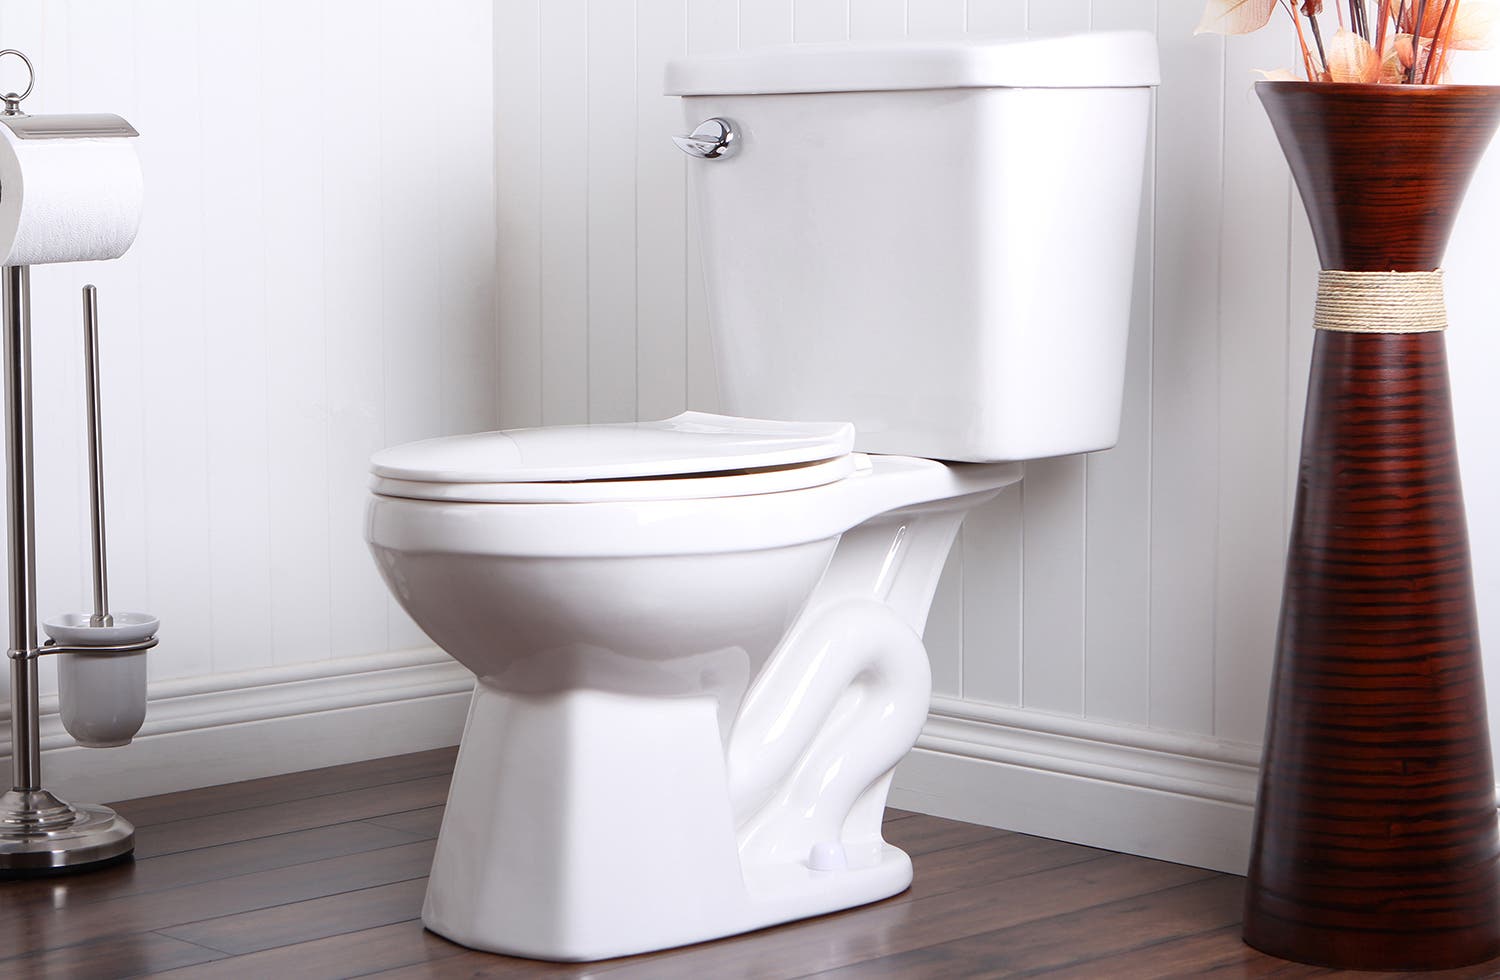 Bathroom design consideration: Where should you put the toilet?